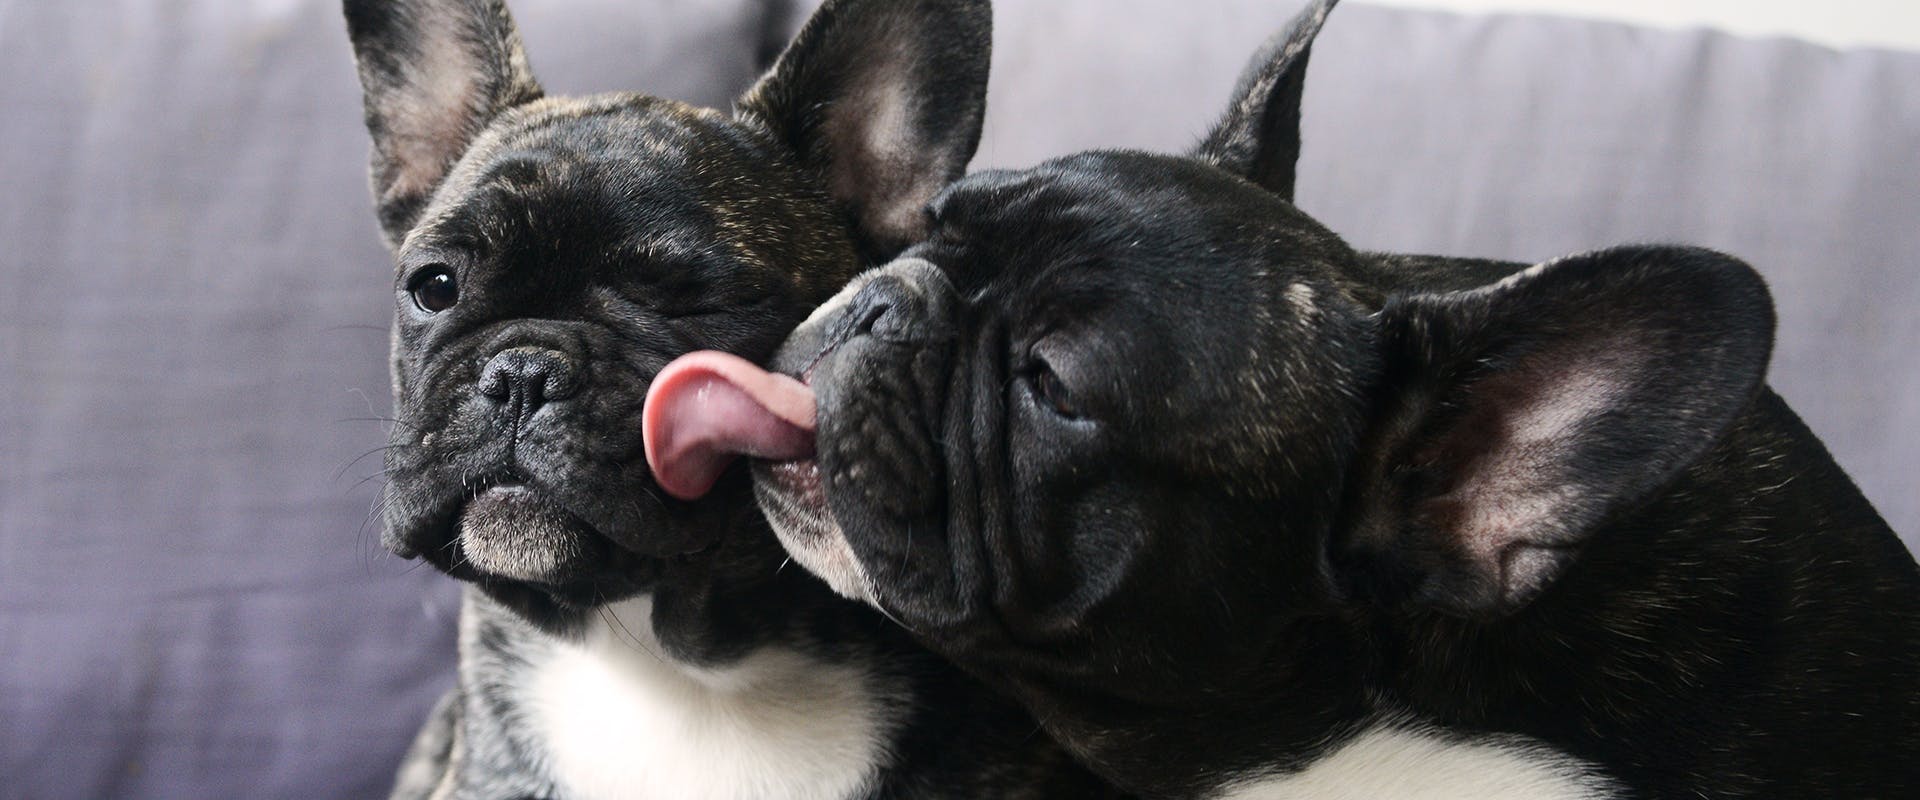 Two black French Bulldogs sitting on a blue sofa, one licking the face of the other